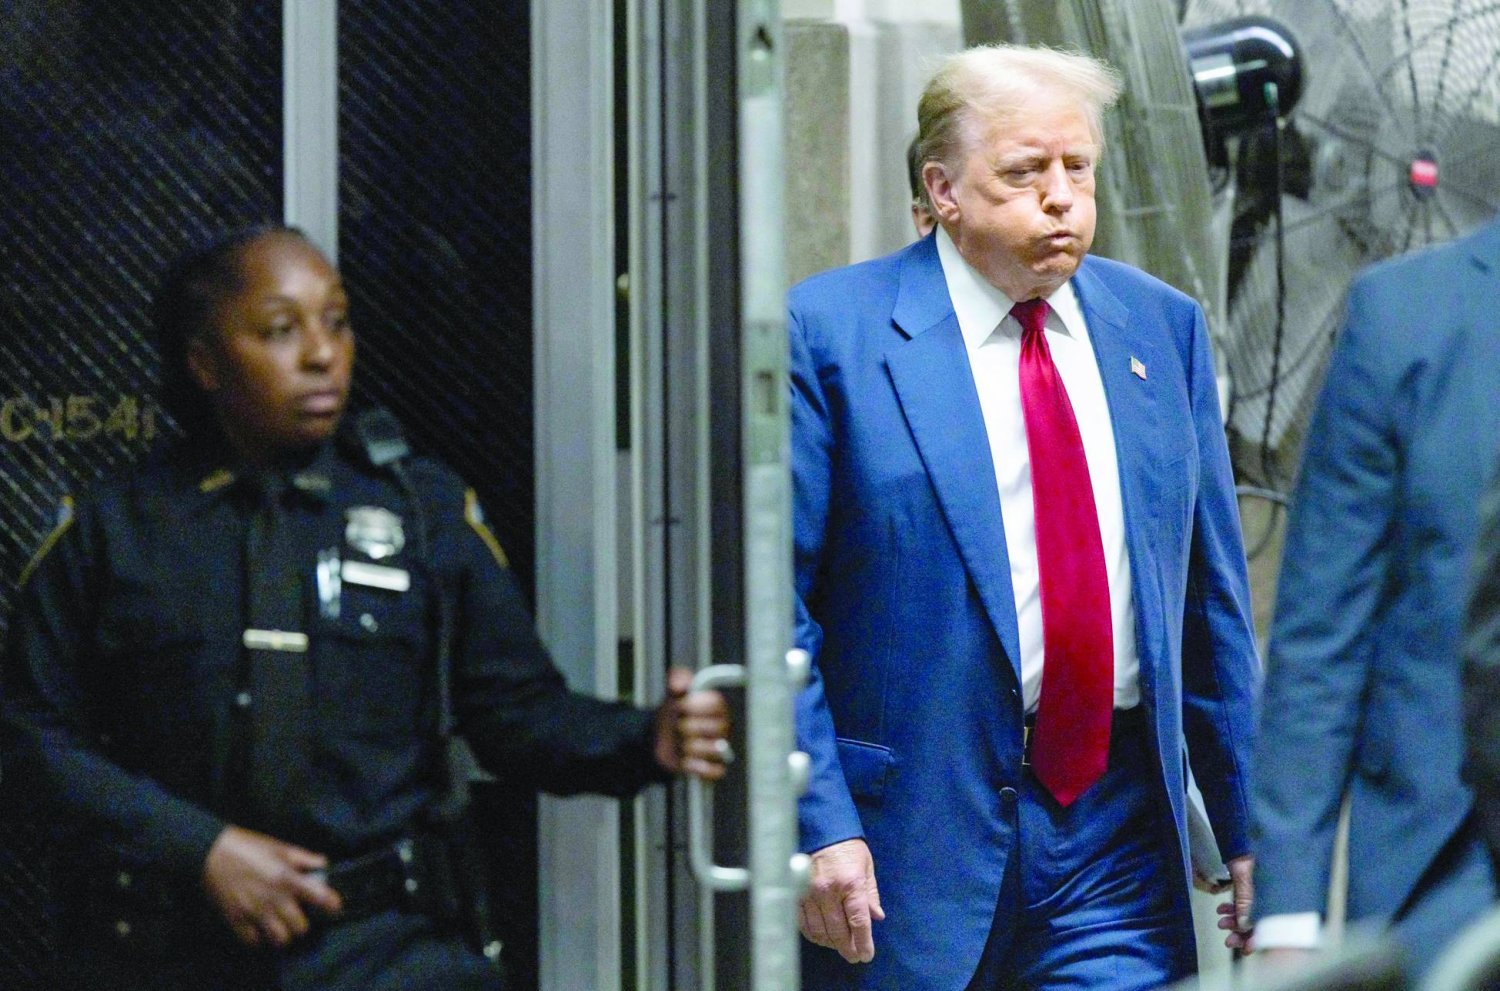 Former US President Donald Trump walks back to the courtroom after a break in his trial for allegedly covering up hush money payments linked to extramarital affairs, at Manhattan Criminal Court in New York City, on April 30, 2024. (Photo by JUSTIN LANE / POOL / AFP)